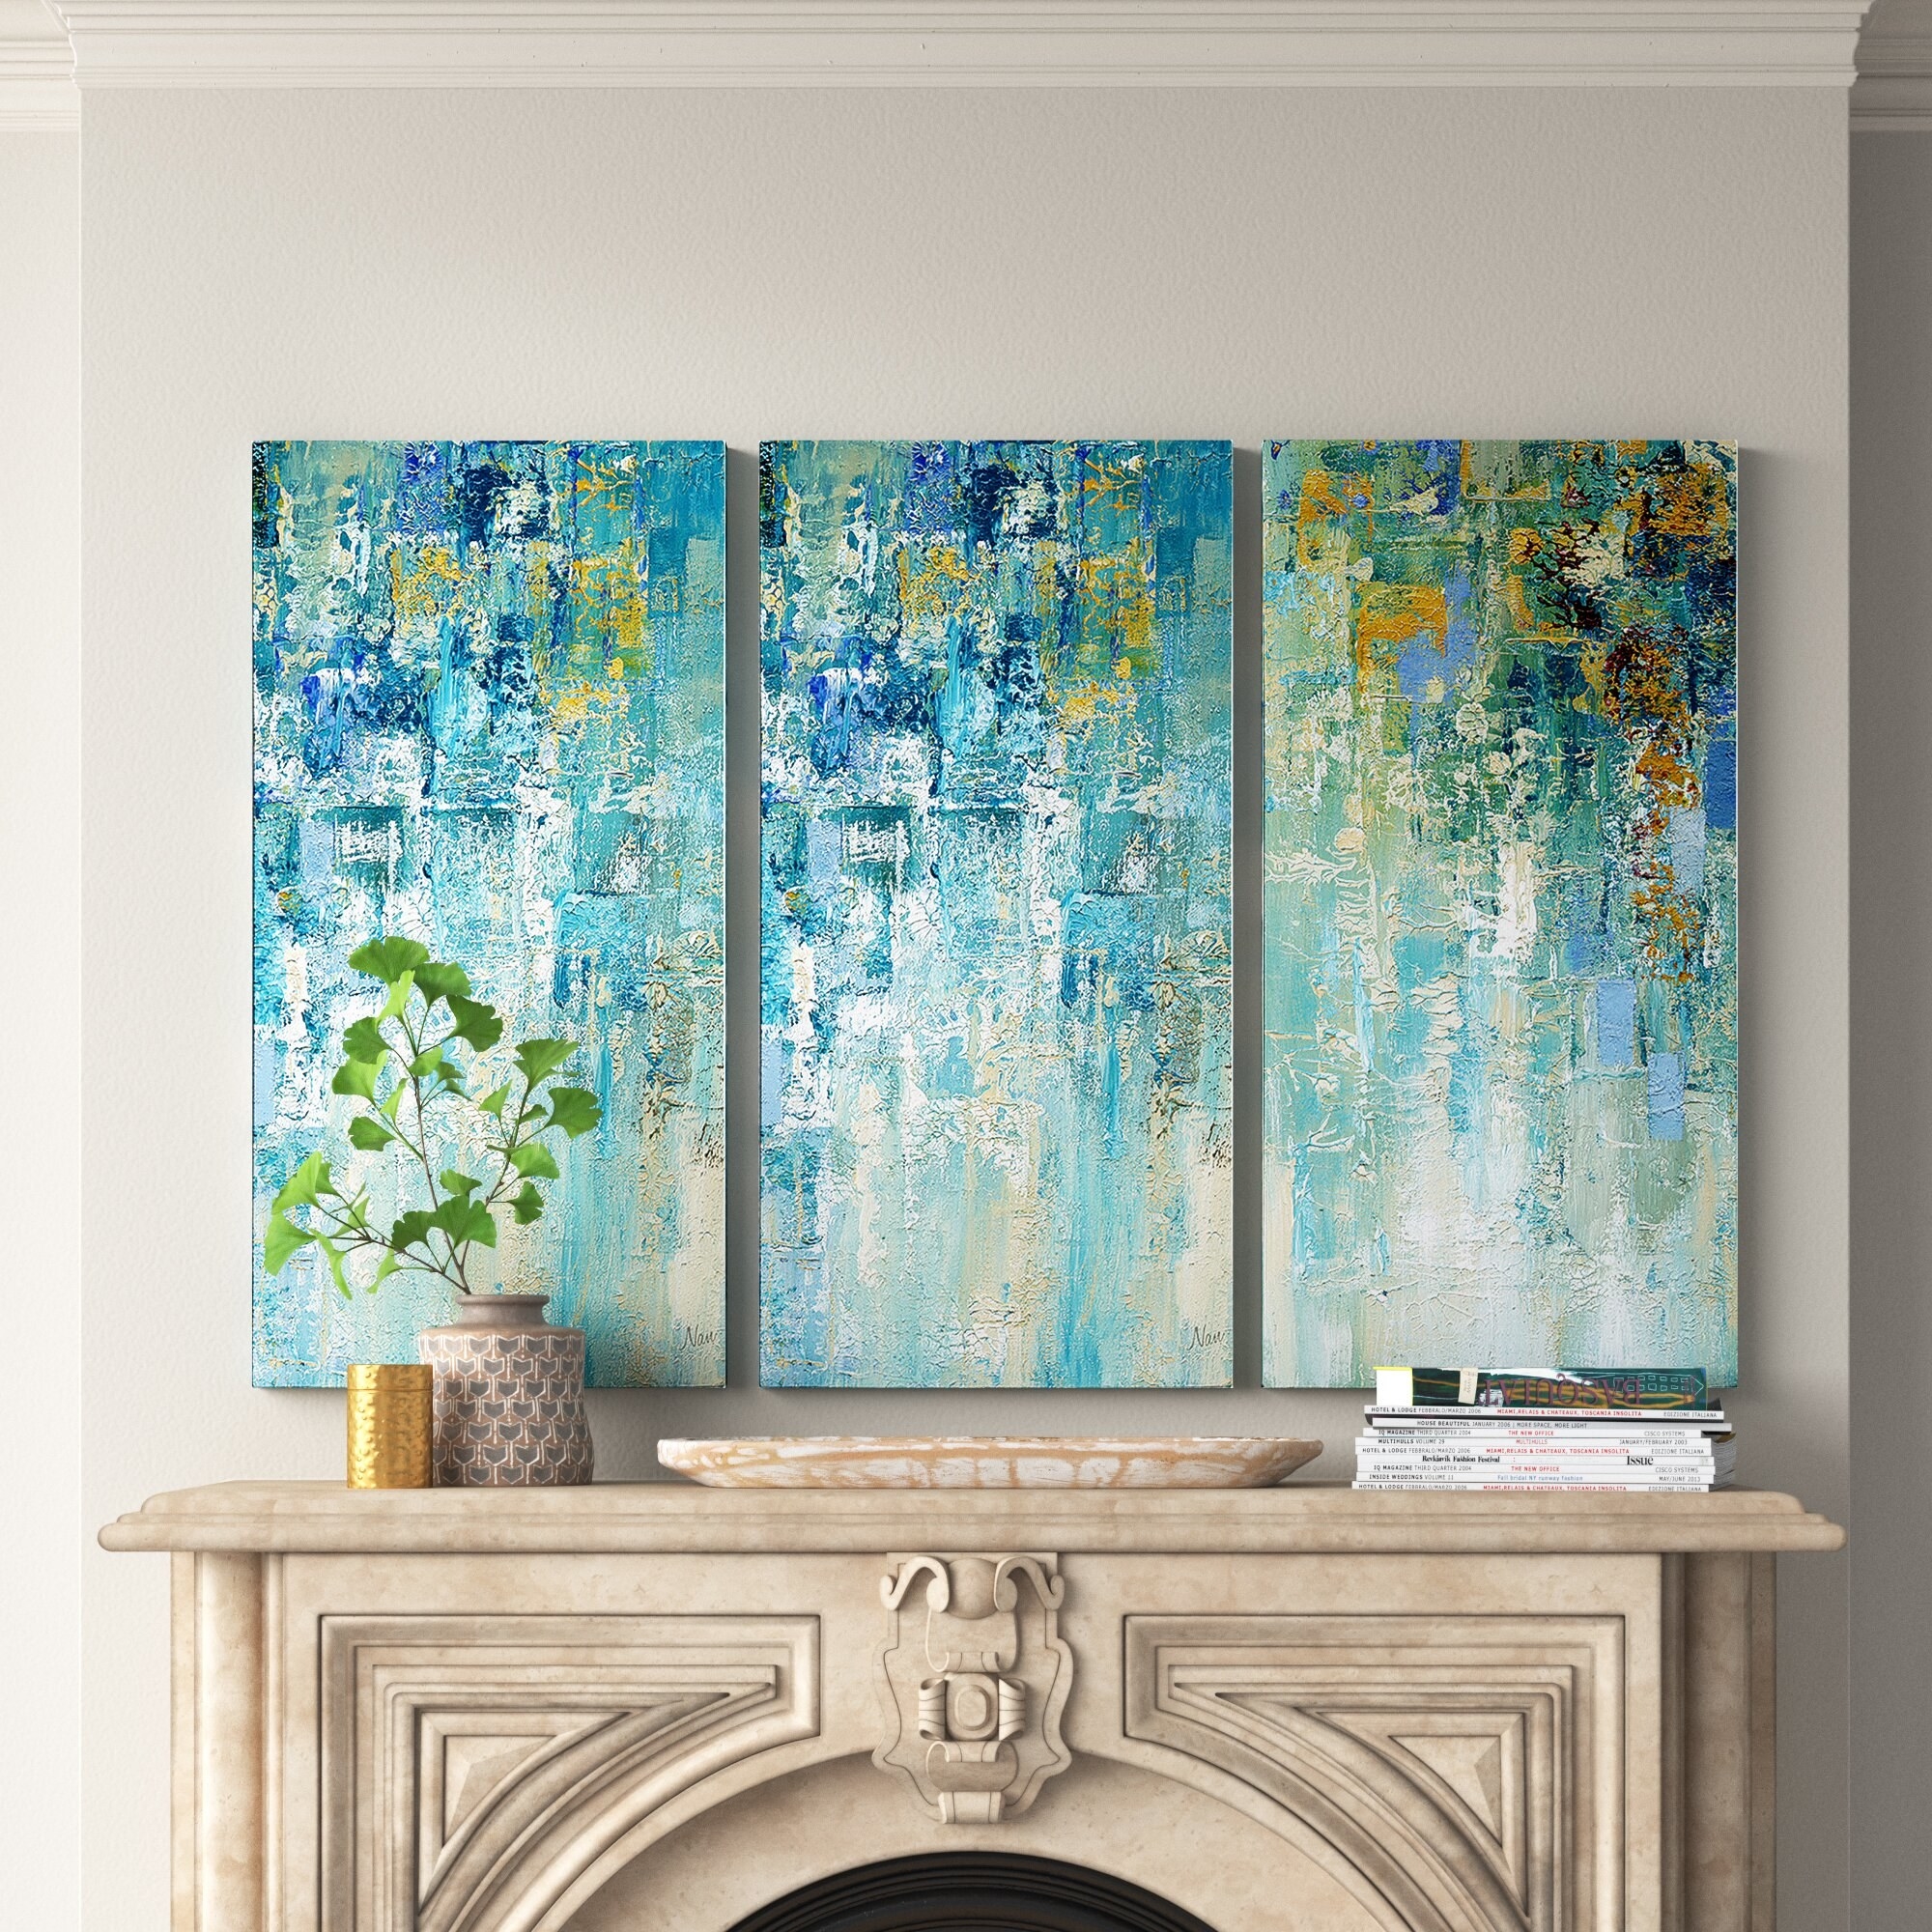 watercolor blue and yellow art triptych above antique-looking white fireplace mantle